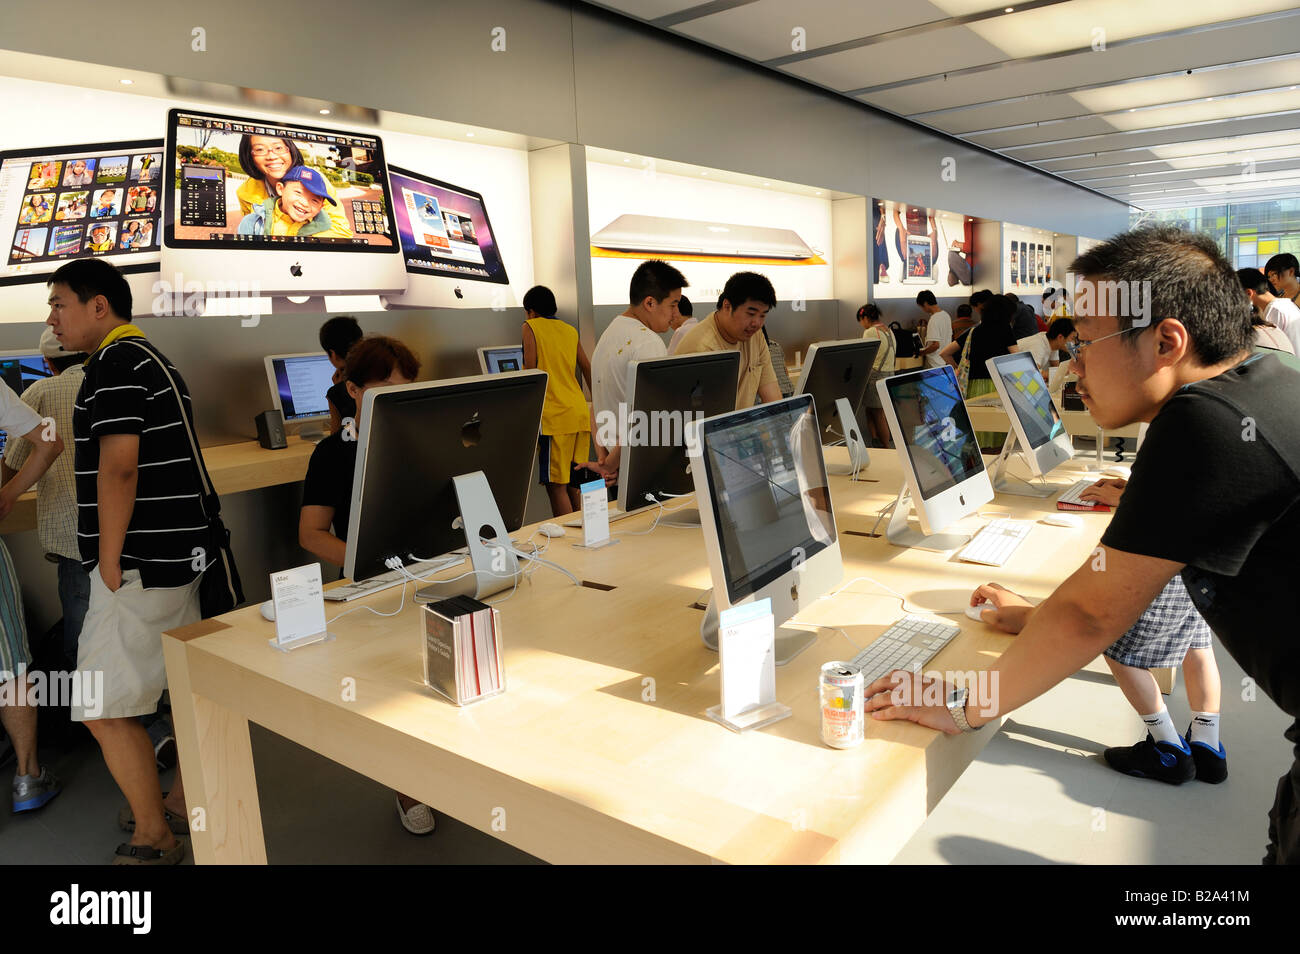 Apple store editorial stock photo. Image of asia, electronic - 40494138